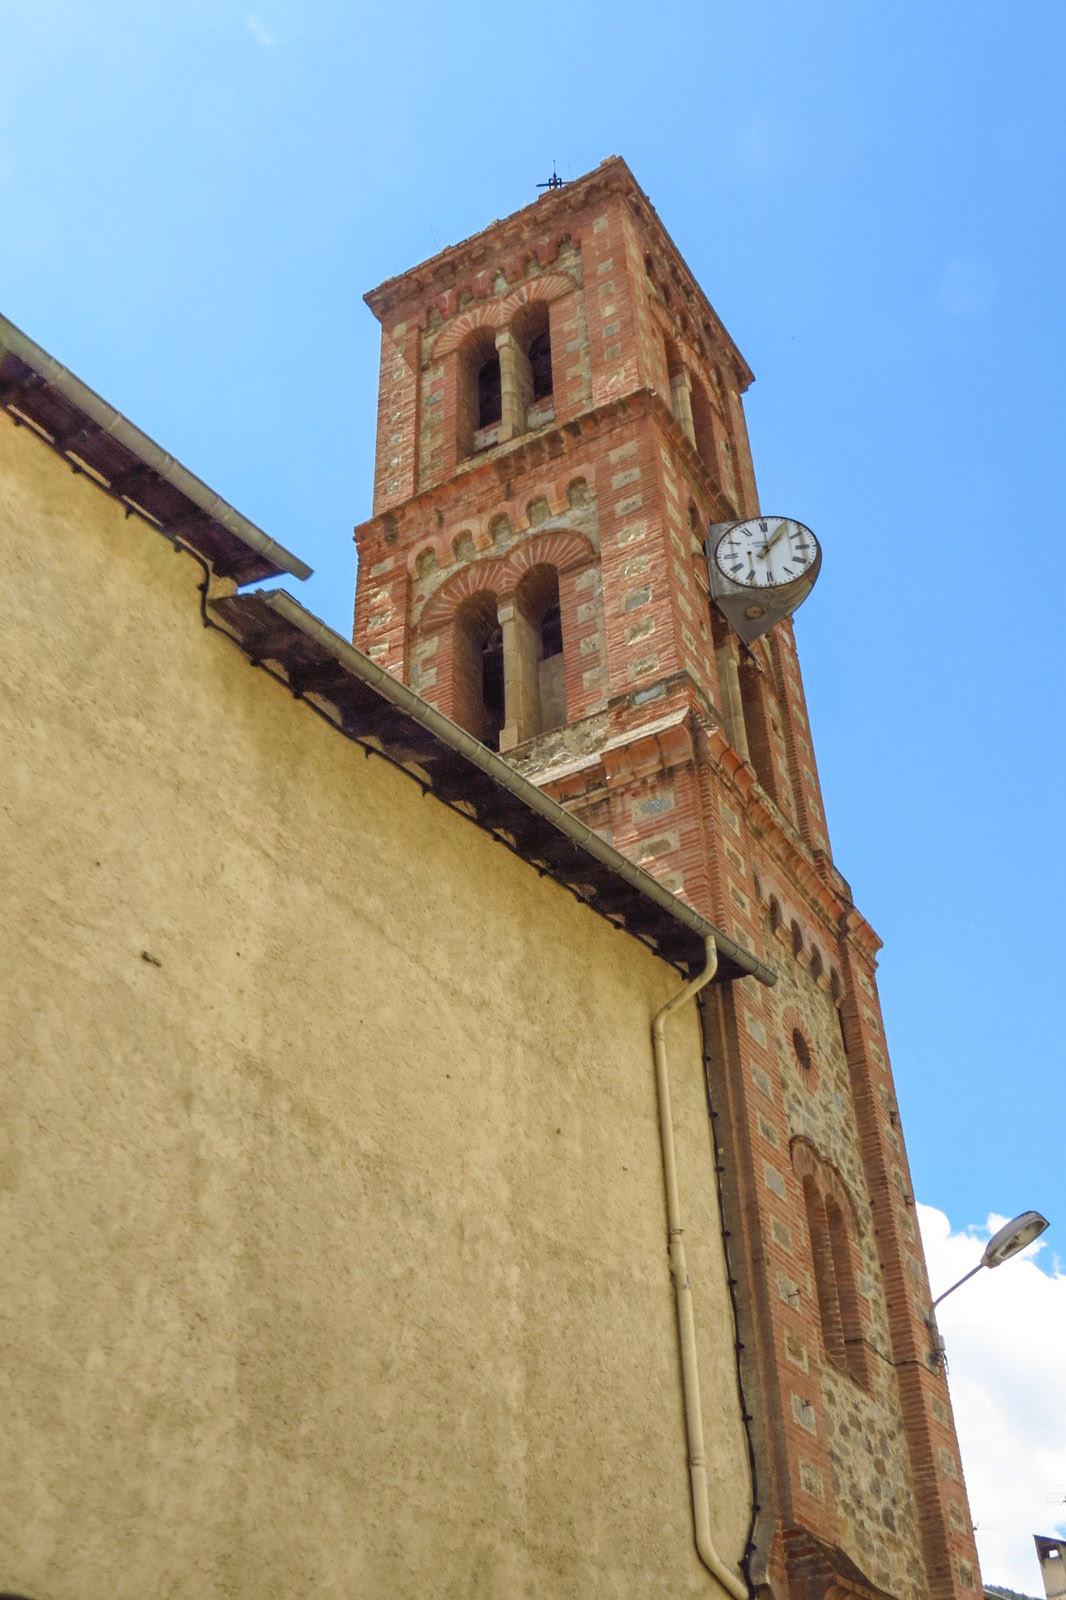 clock-tower-at-olette-driving-france-pyrenees